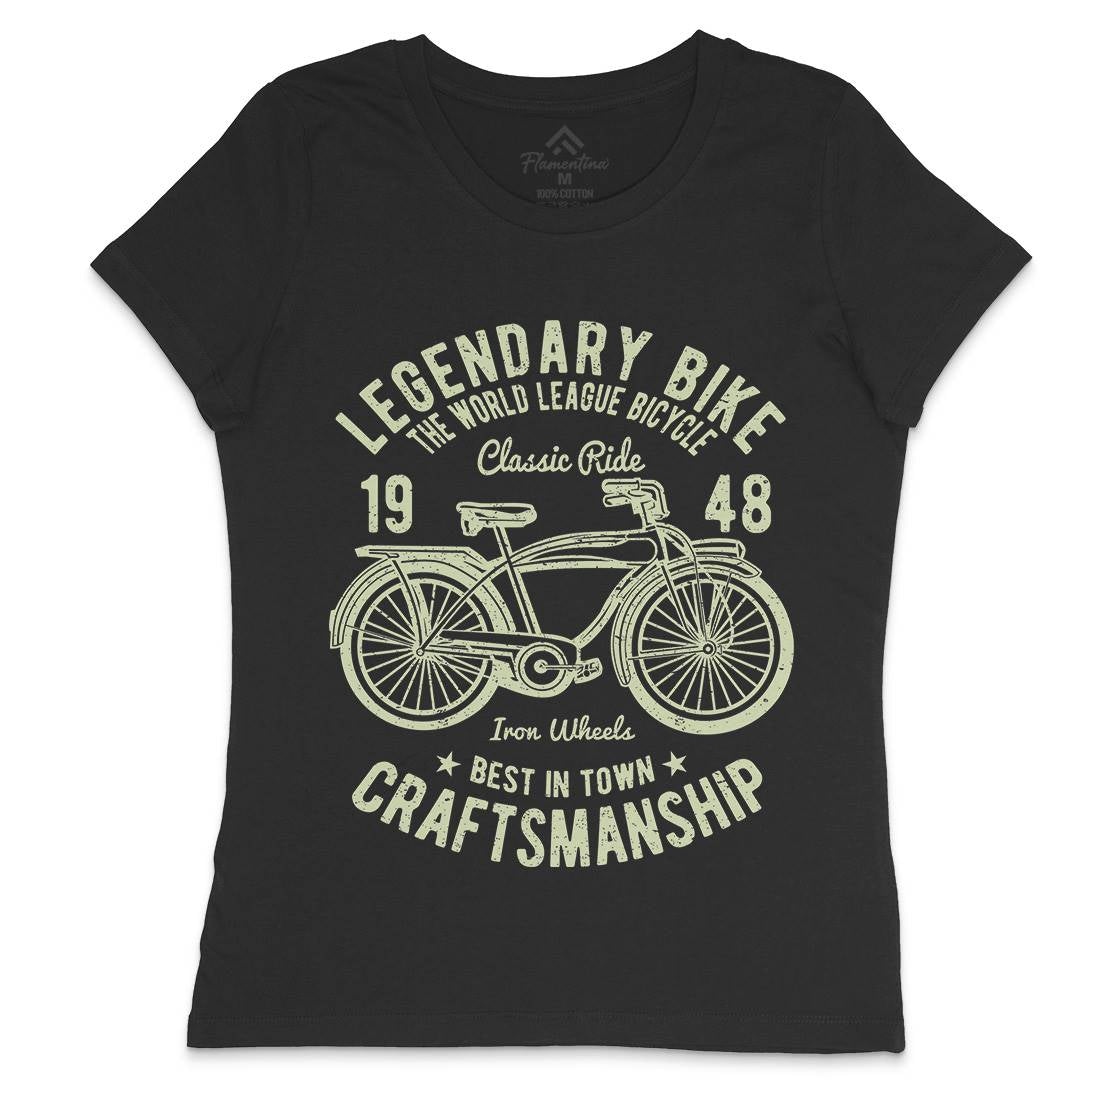 Classic Bicycle Womens Crew Neck T-Shirt Bikes A035